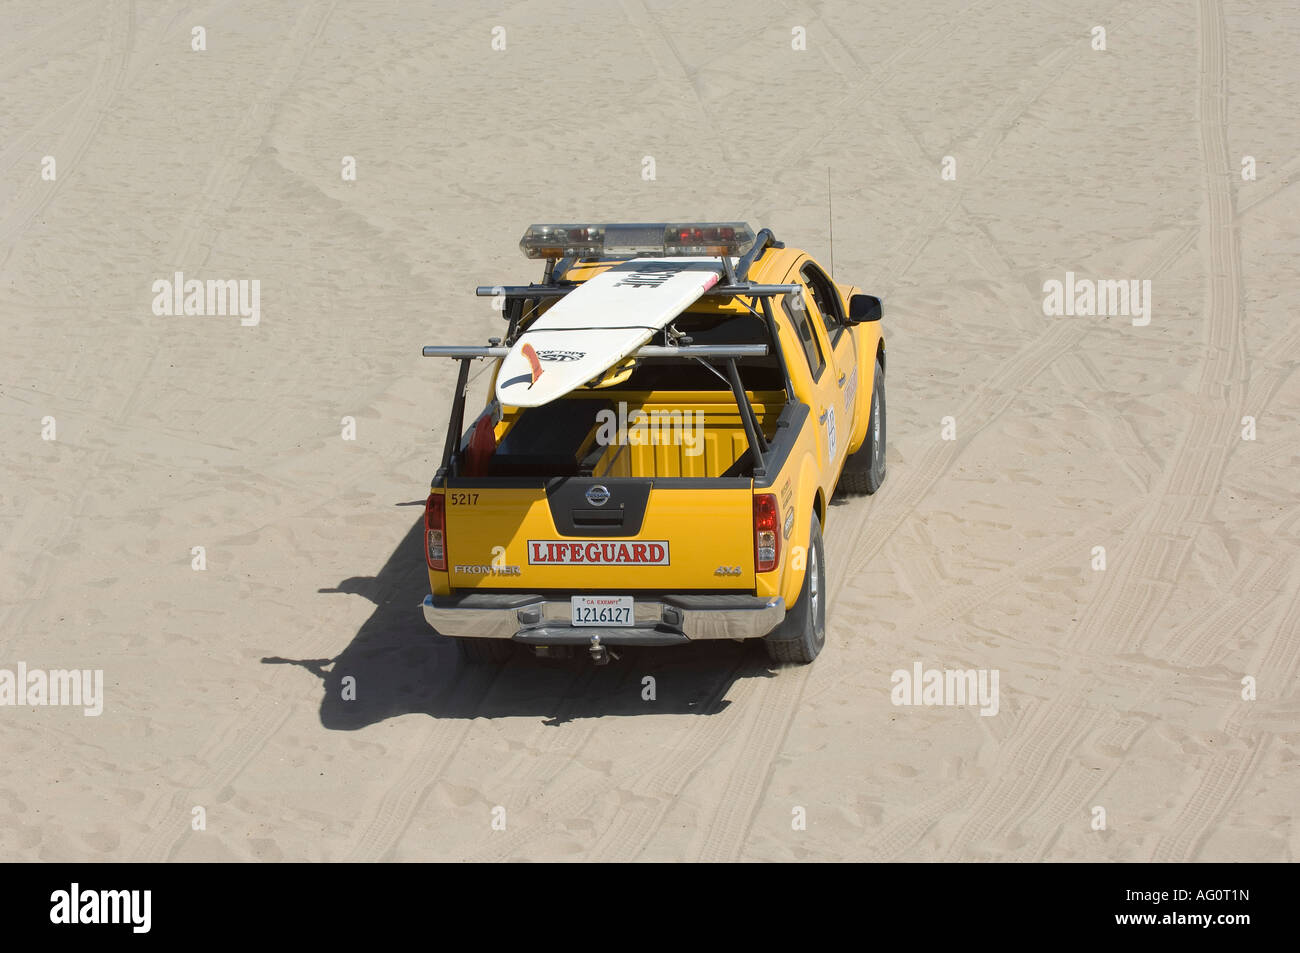 A lifeguard for Surf City USA, Huntington Beach patrols the oceanfront with a surfboard and yellow truck. Stock Photo